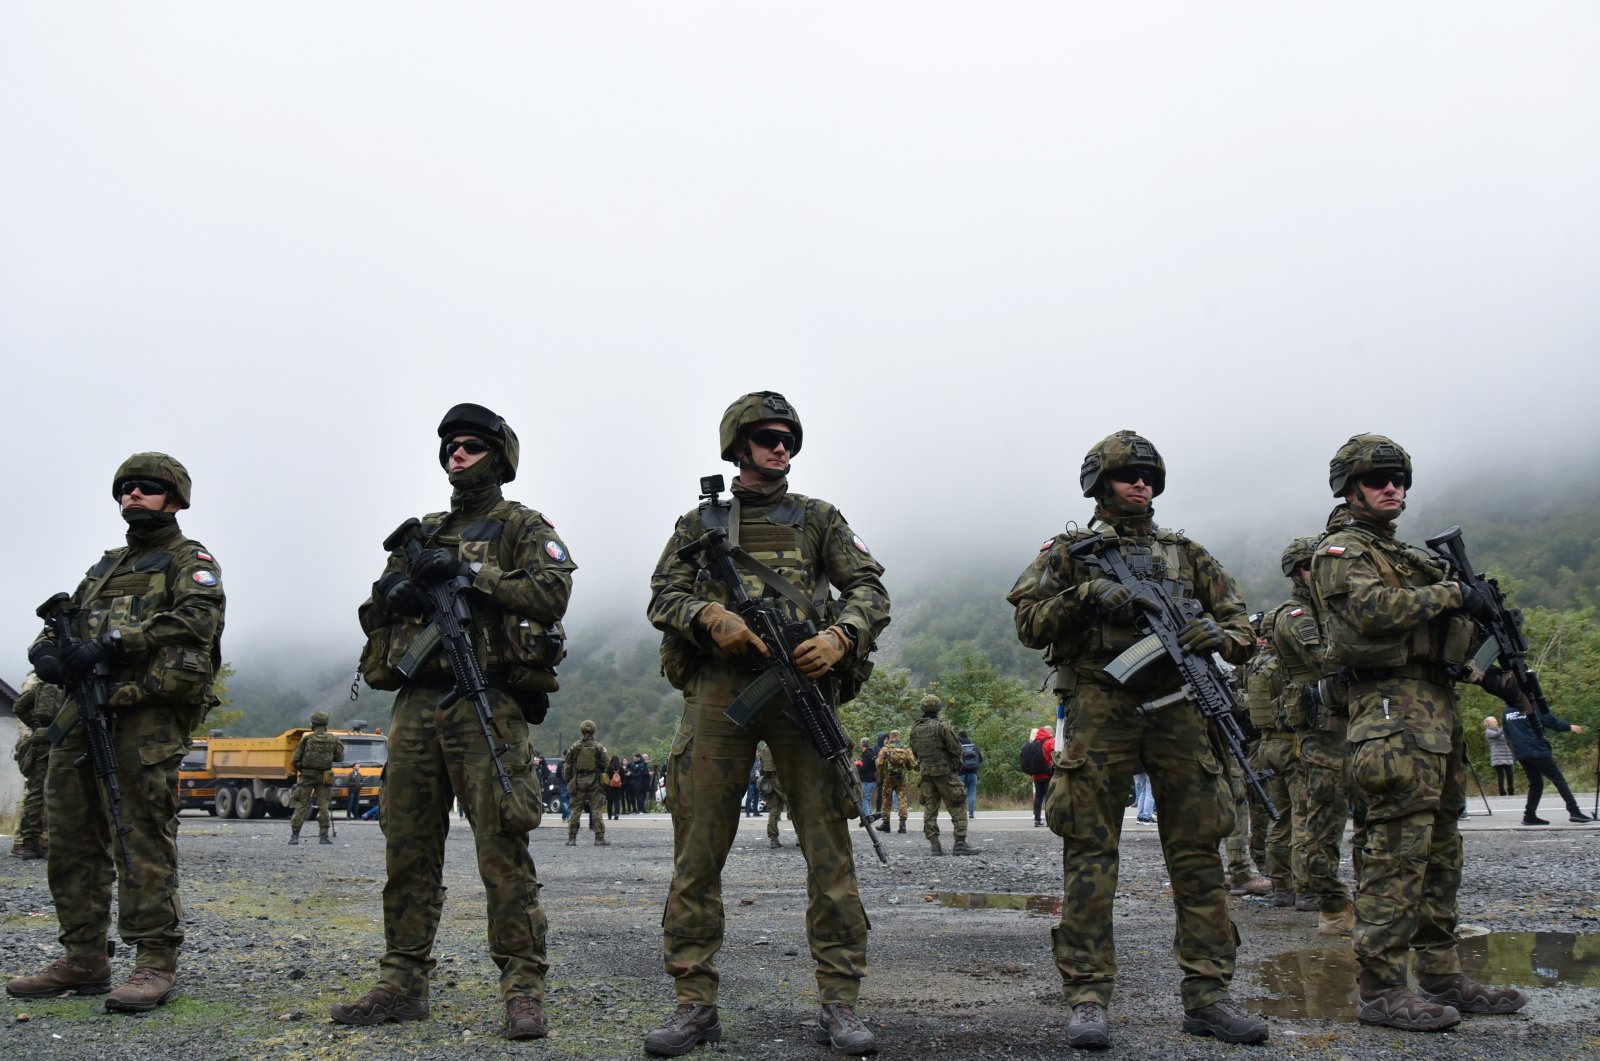 Members of the KFOR peacekeeping force patrol the area near the border crossing between Kosovo and Serbia in Jarinje, Kosovo, Oct. 2, 2021. (Reuters File Photo)